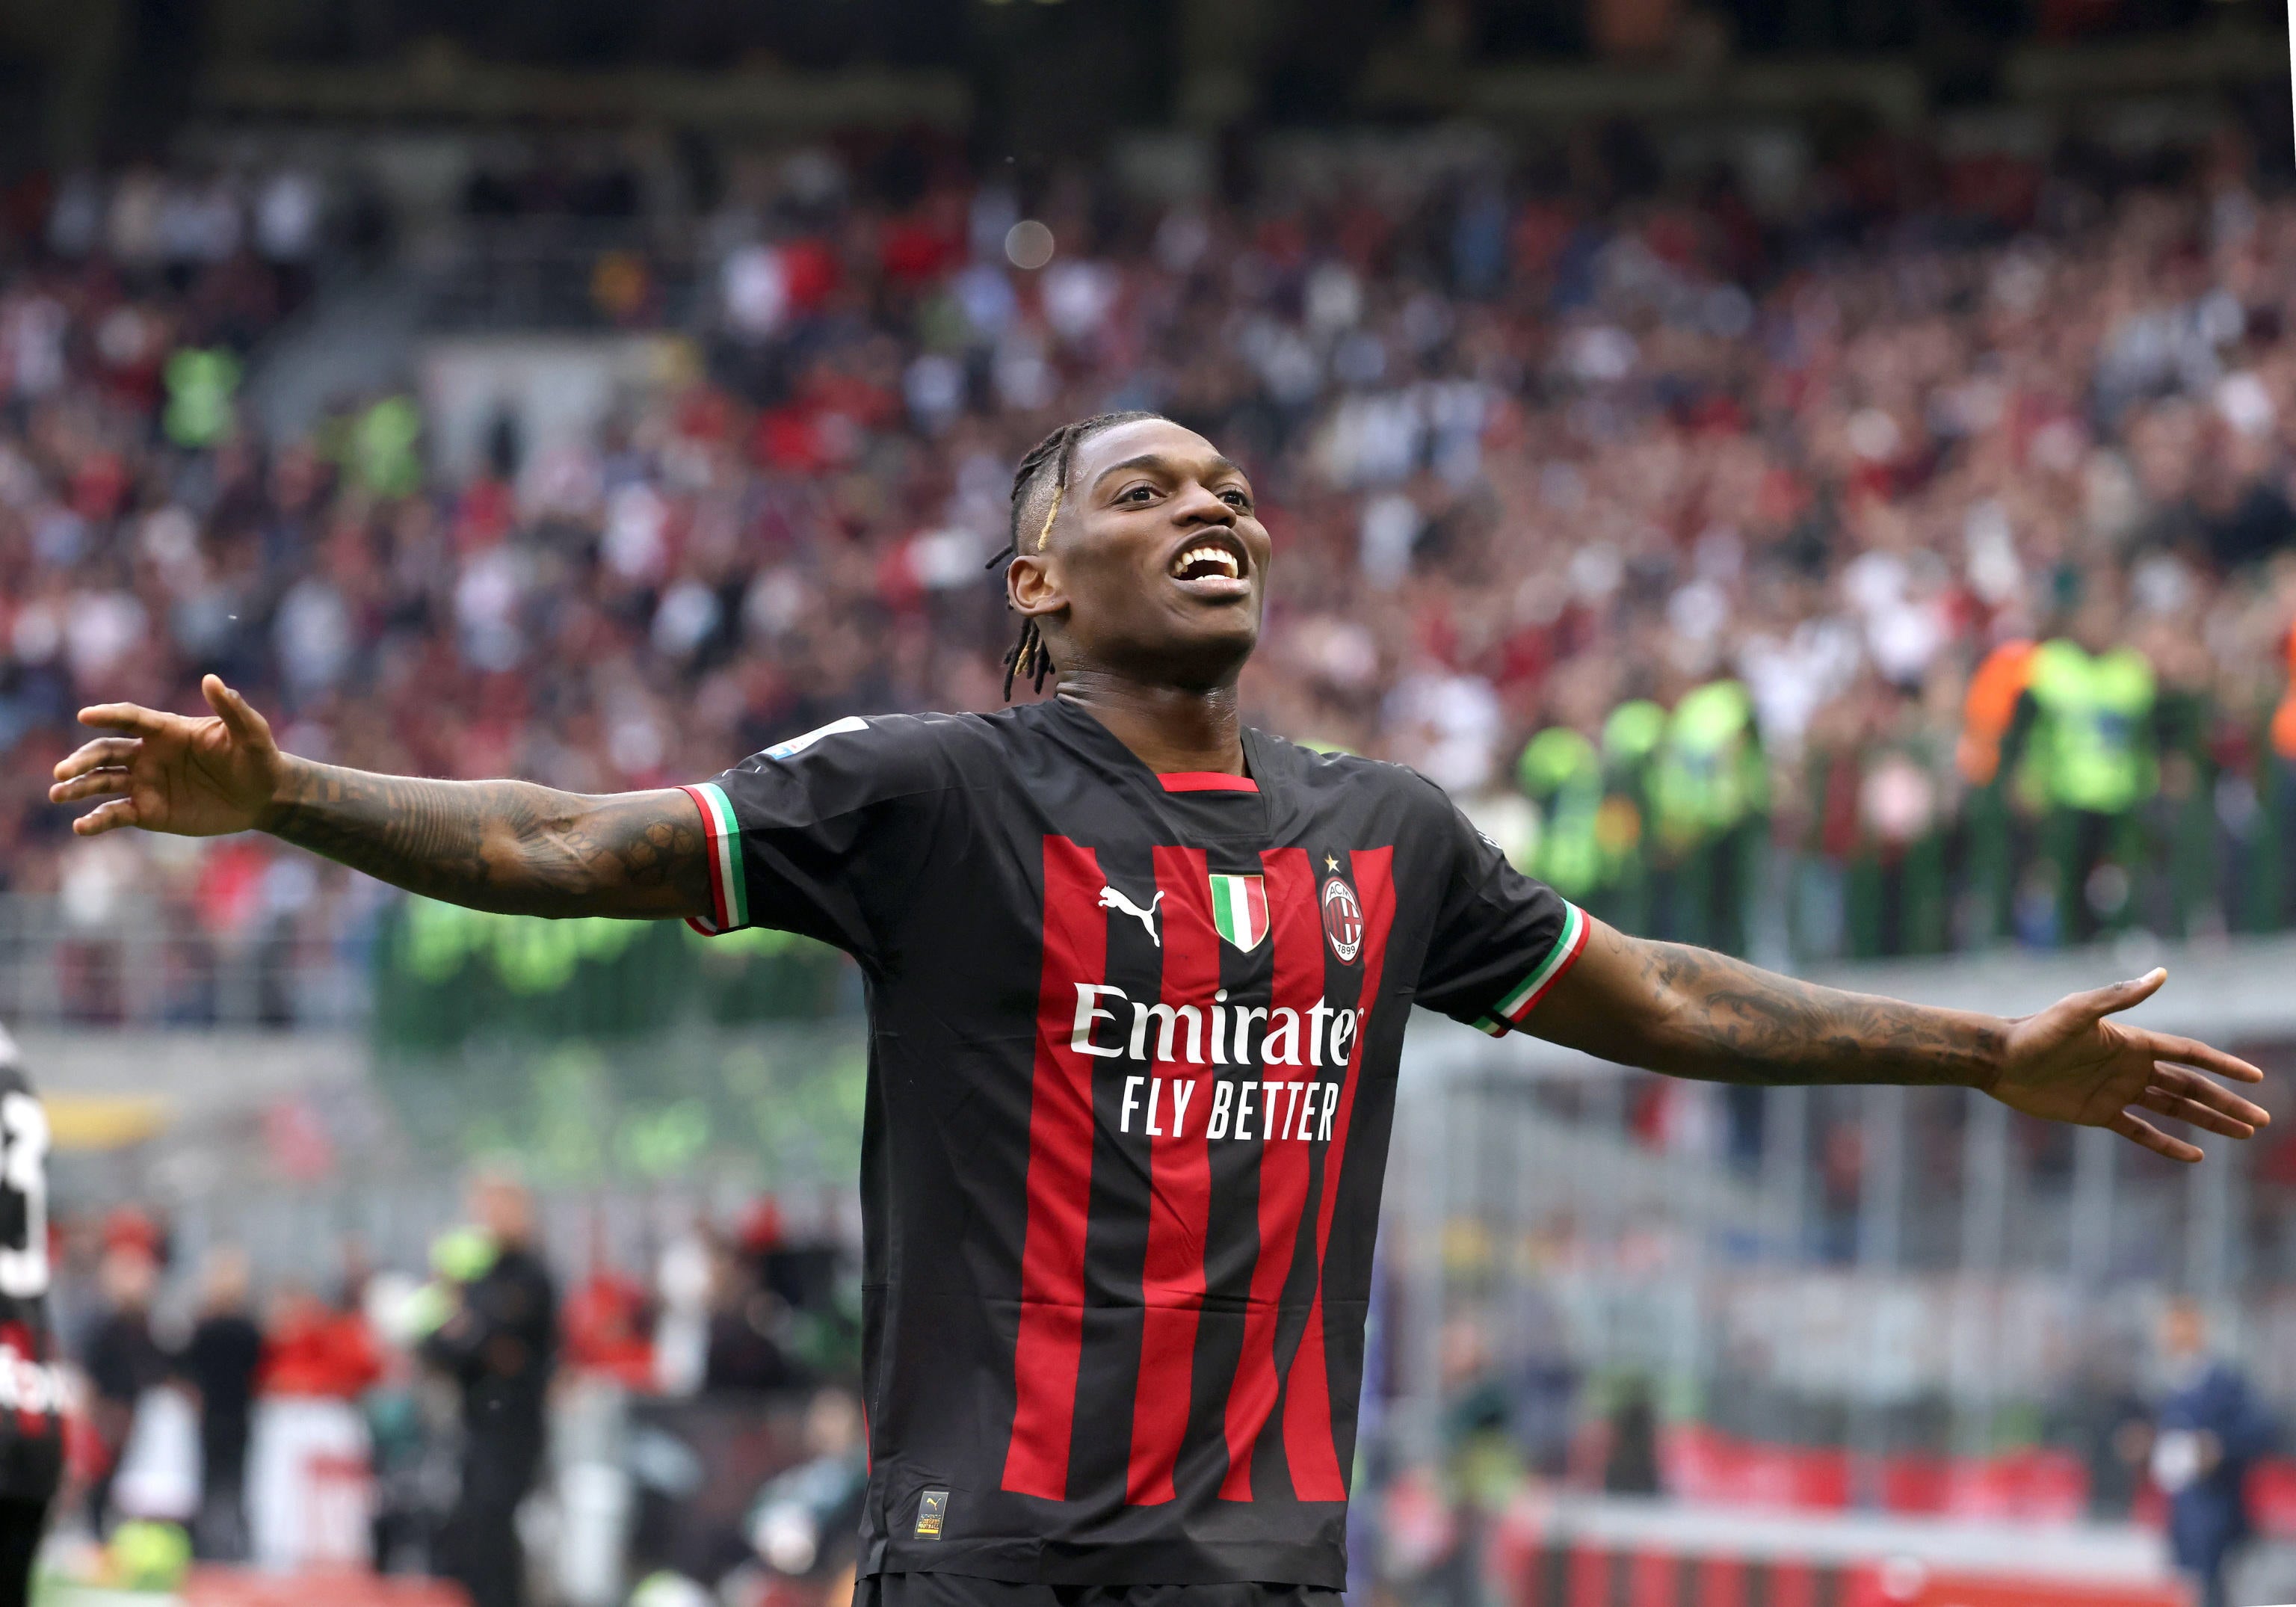 Being confronted by fans and returning star driving AC Milan bid to reverse  history